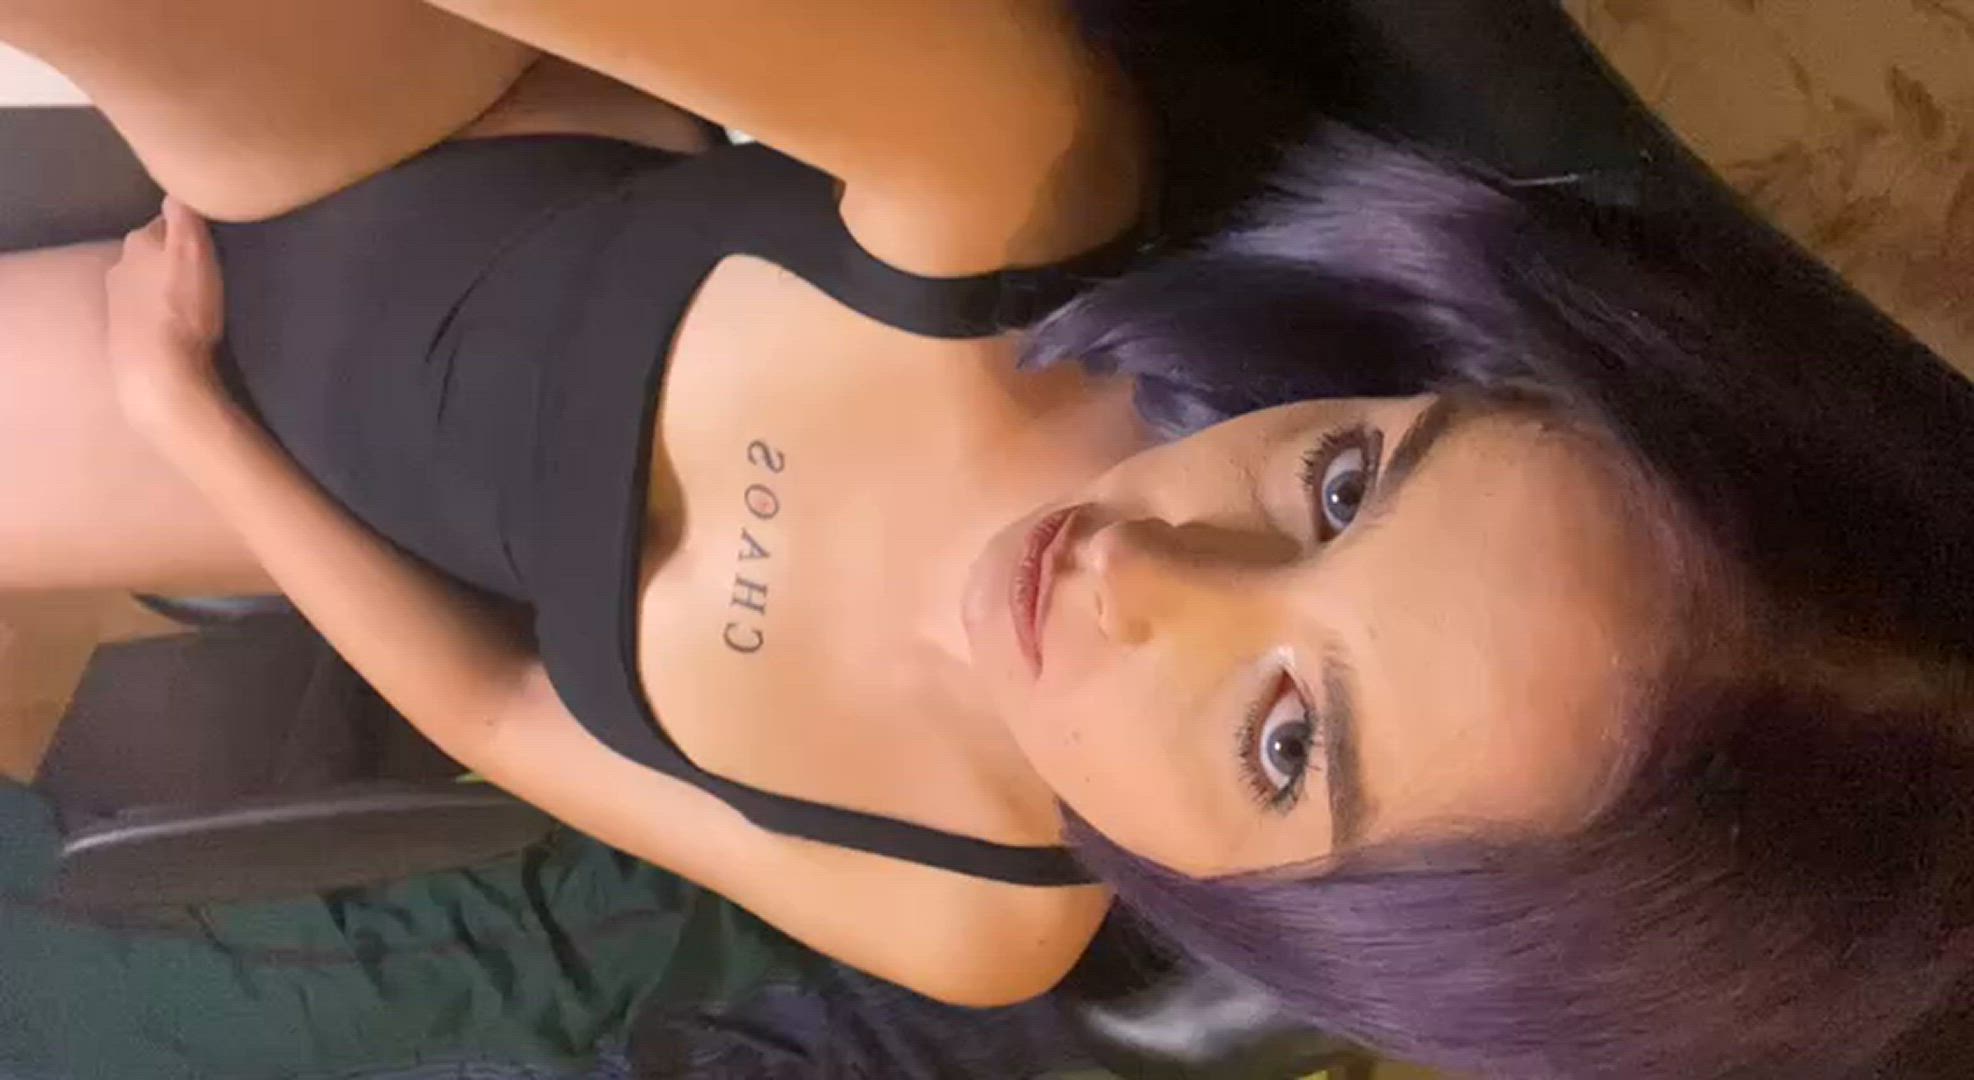 Ass porn video with onlyfans model scarletstorm10 <strong>@scarlet_stormm</strong>